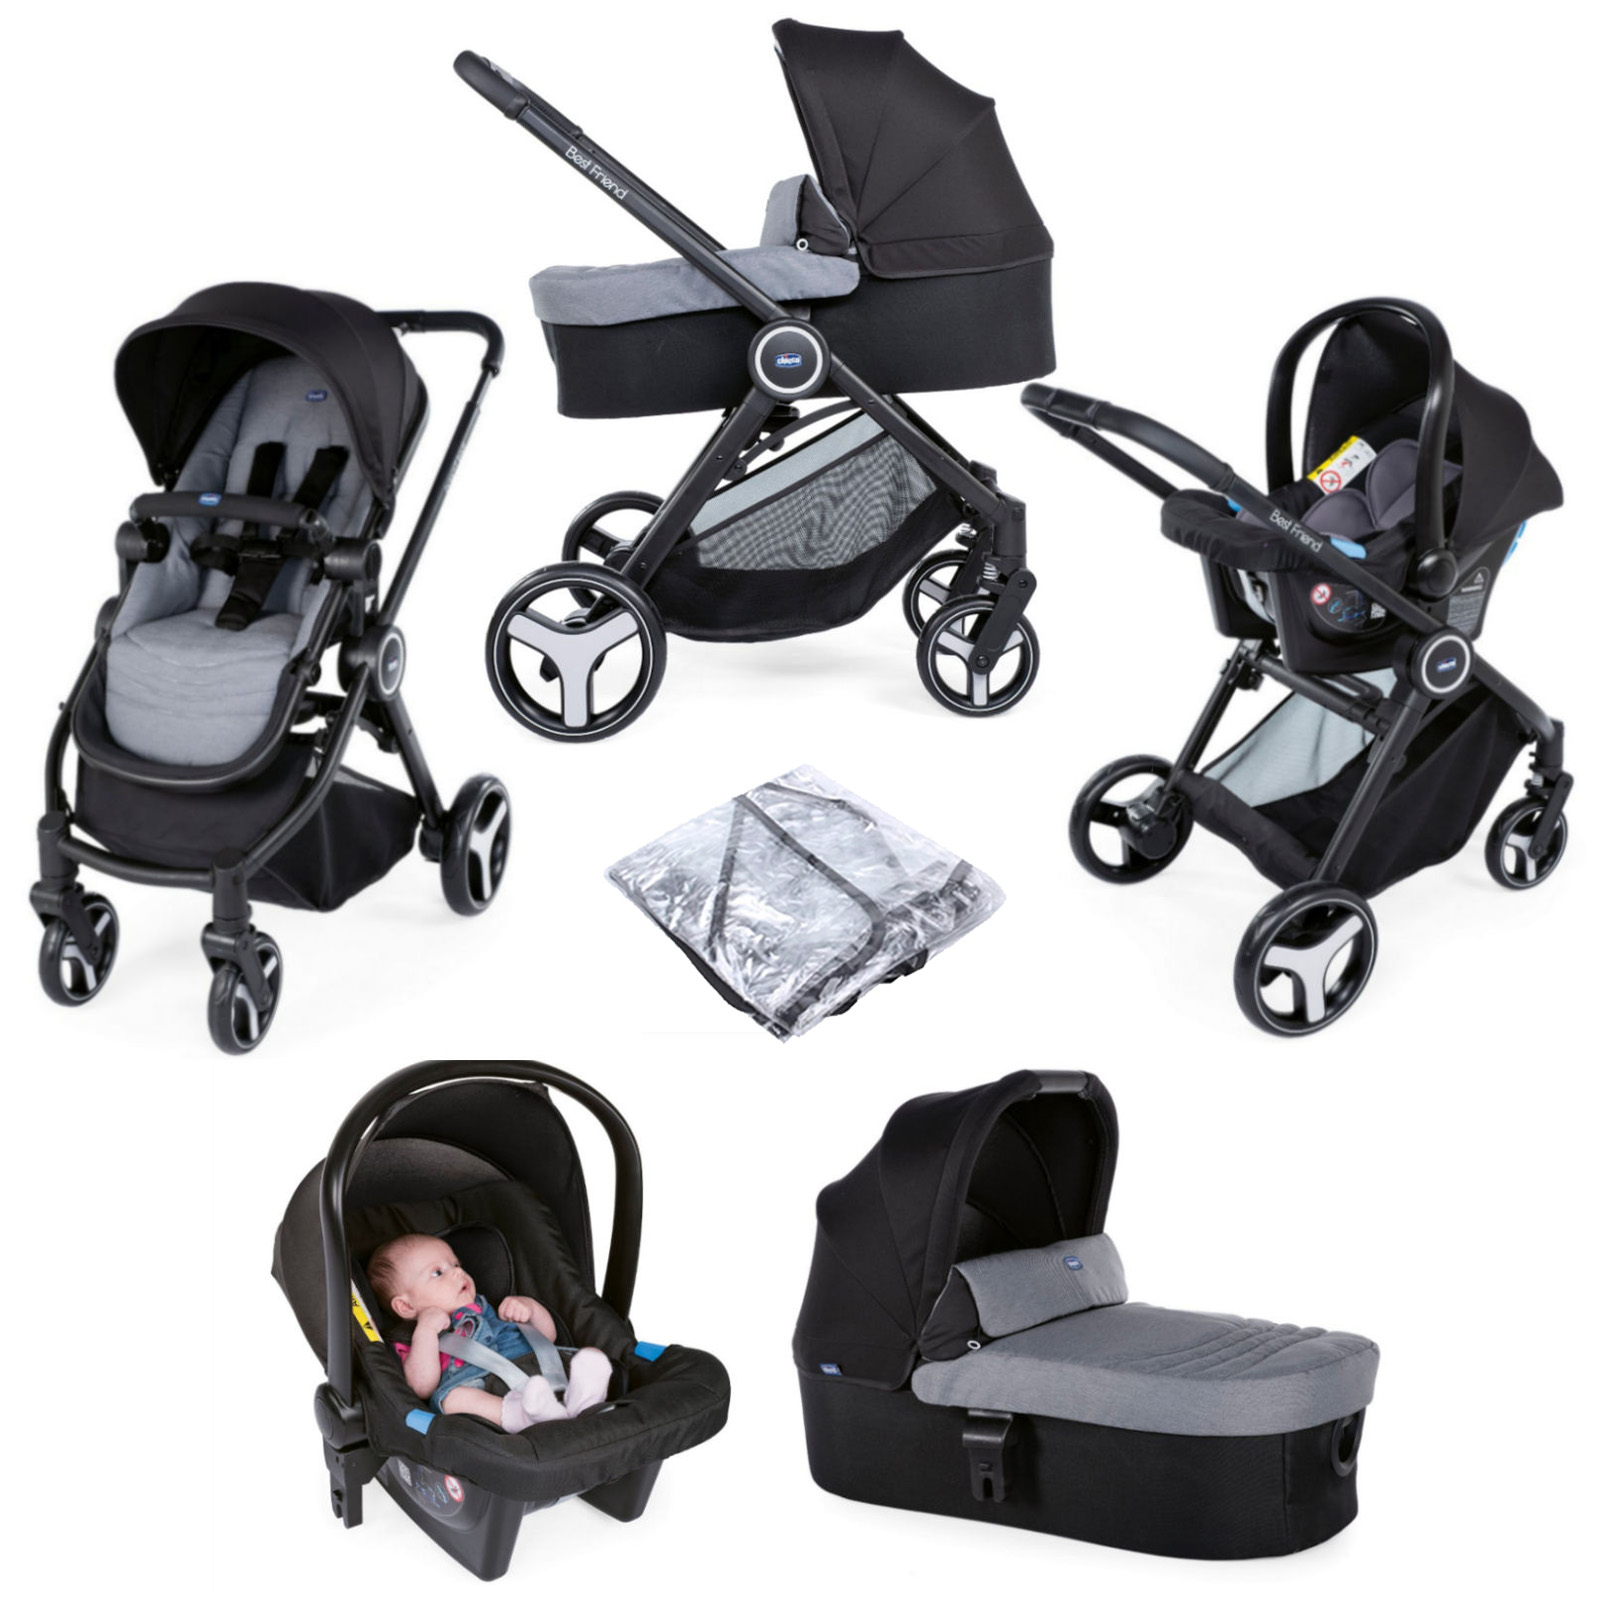 chicco trio best friend travel system